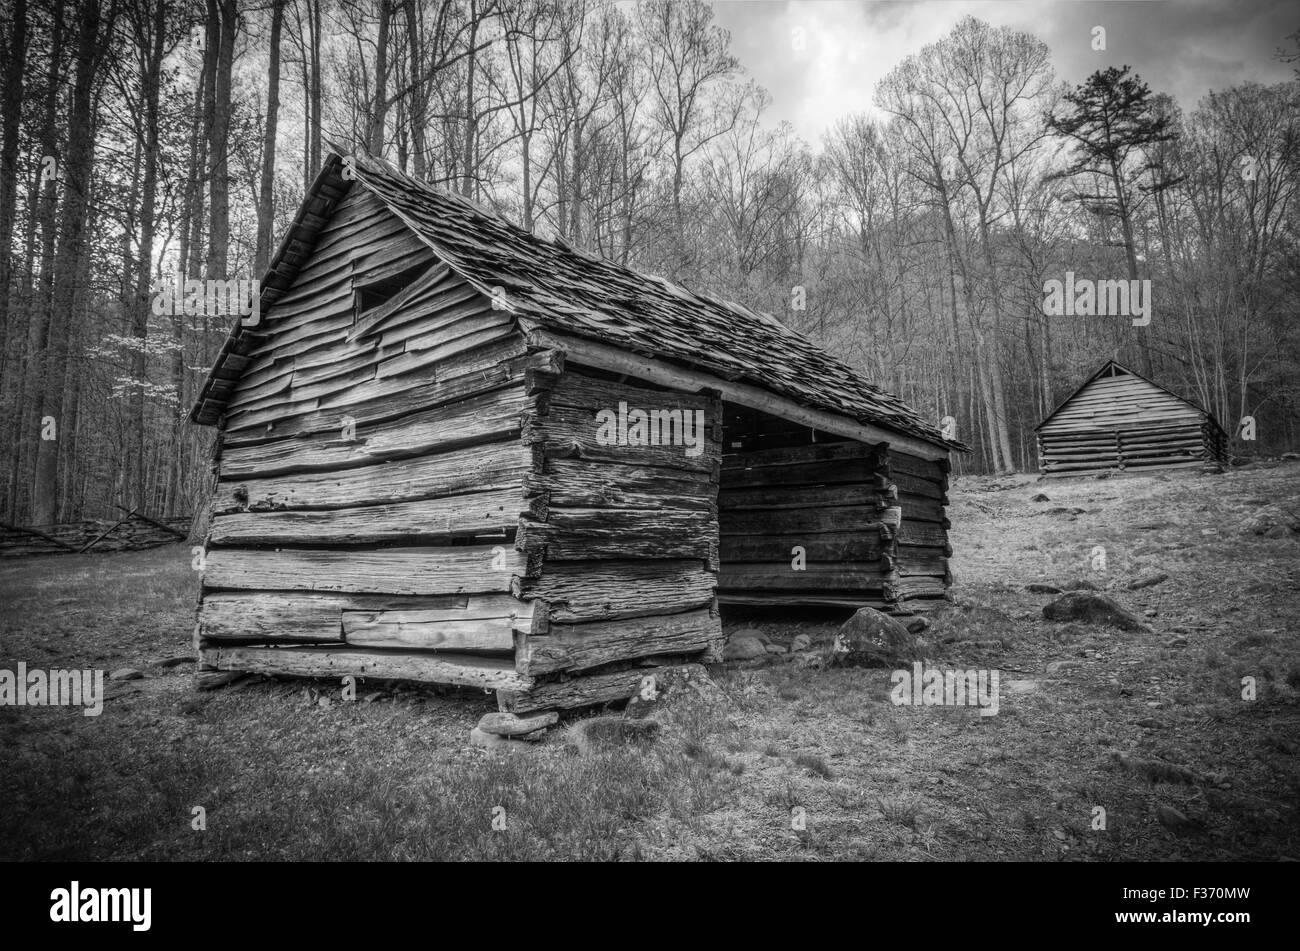 Barns in the Great Smoky Mountains National Park Stock Photo